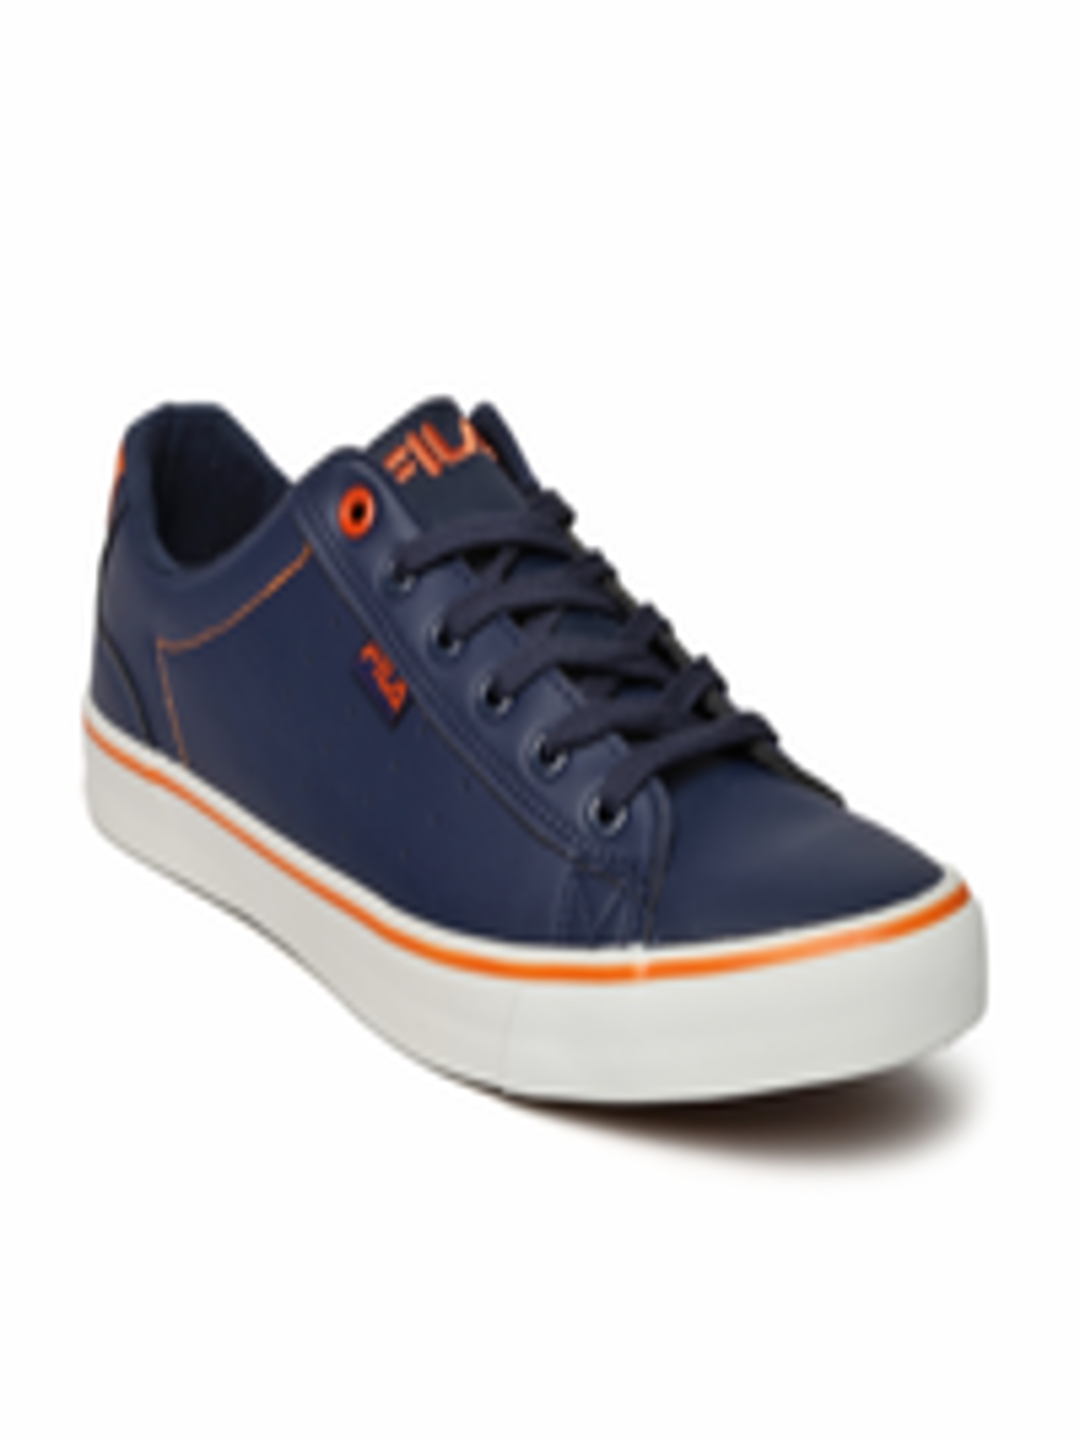 61 Casual Buy navy blue shoes for Women